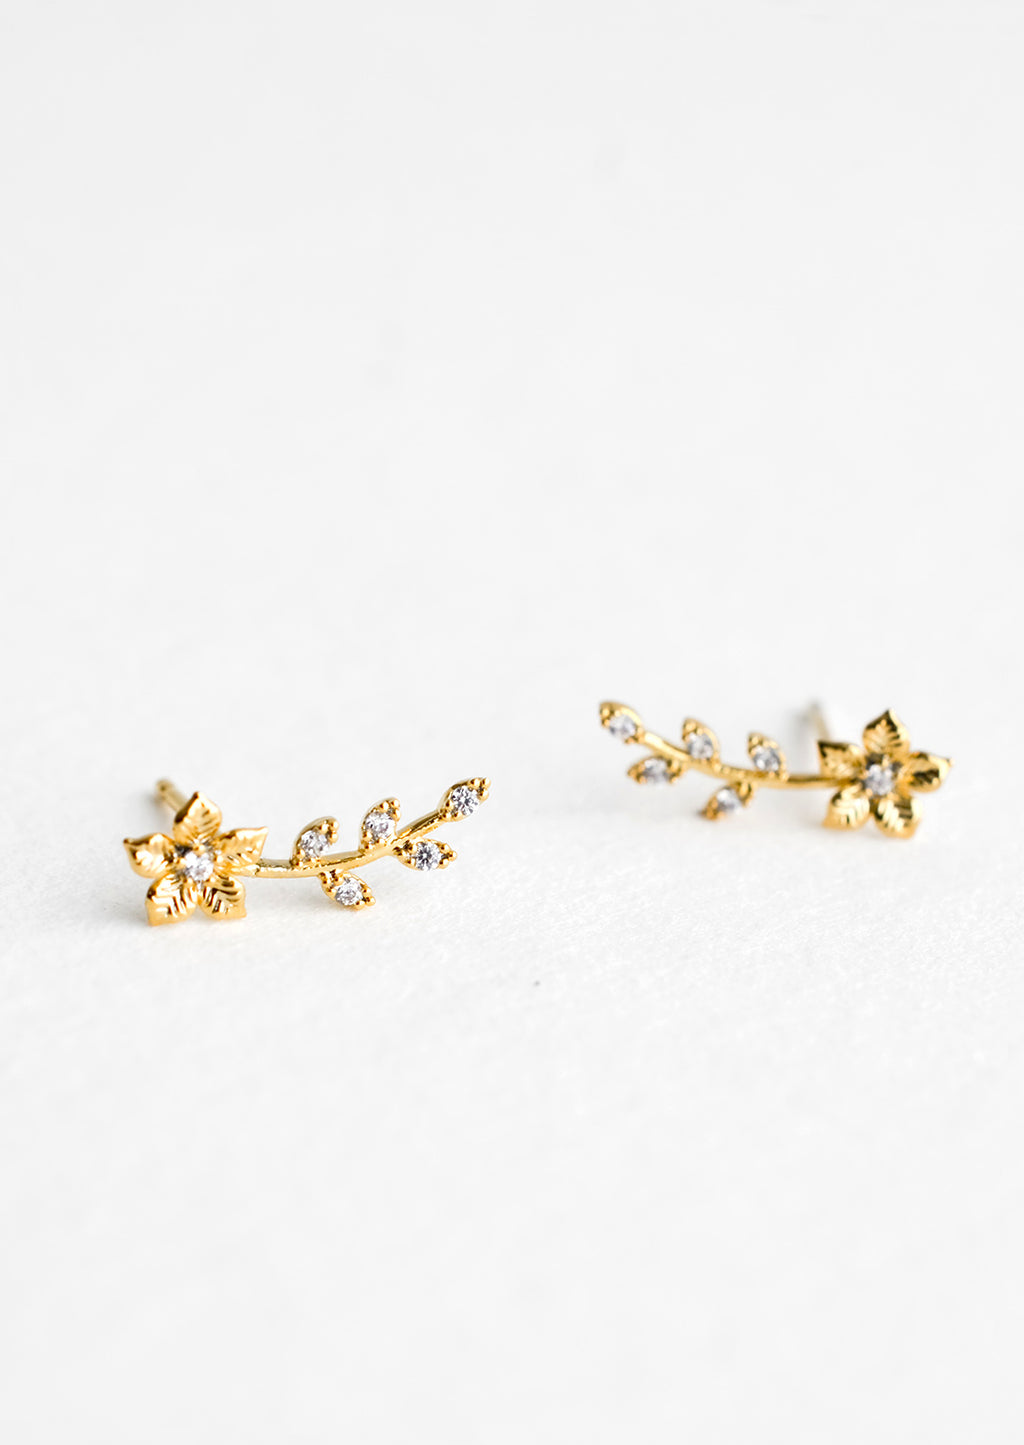 2: A pair of gold climber stud earrings with floral design decorated with crystals.